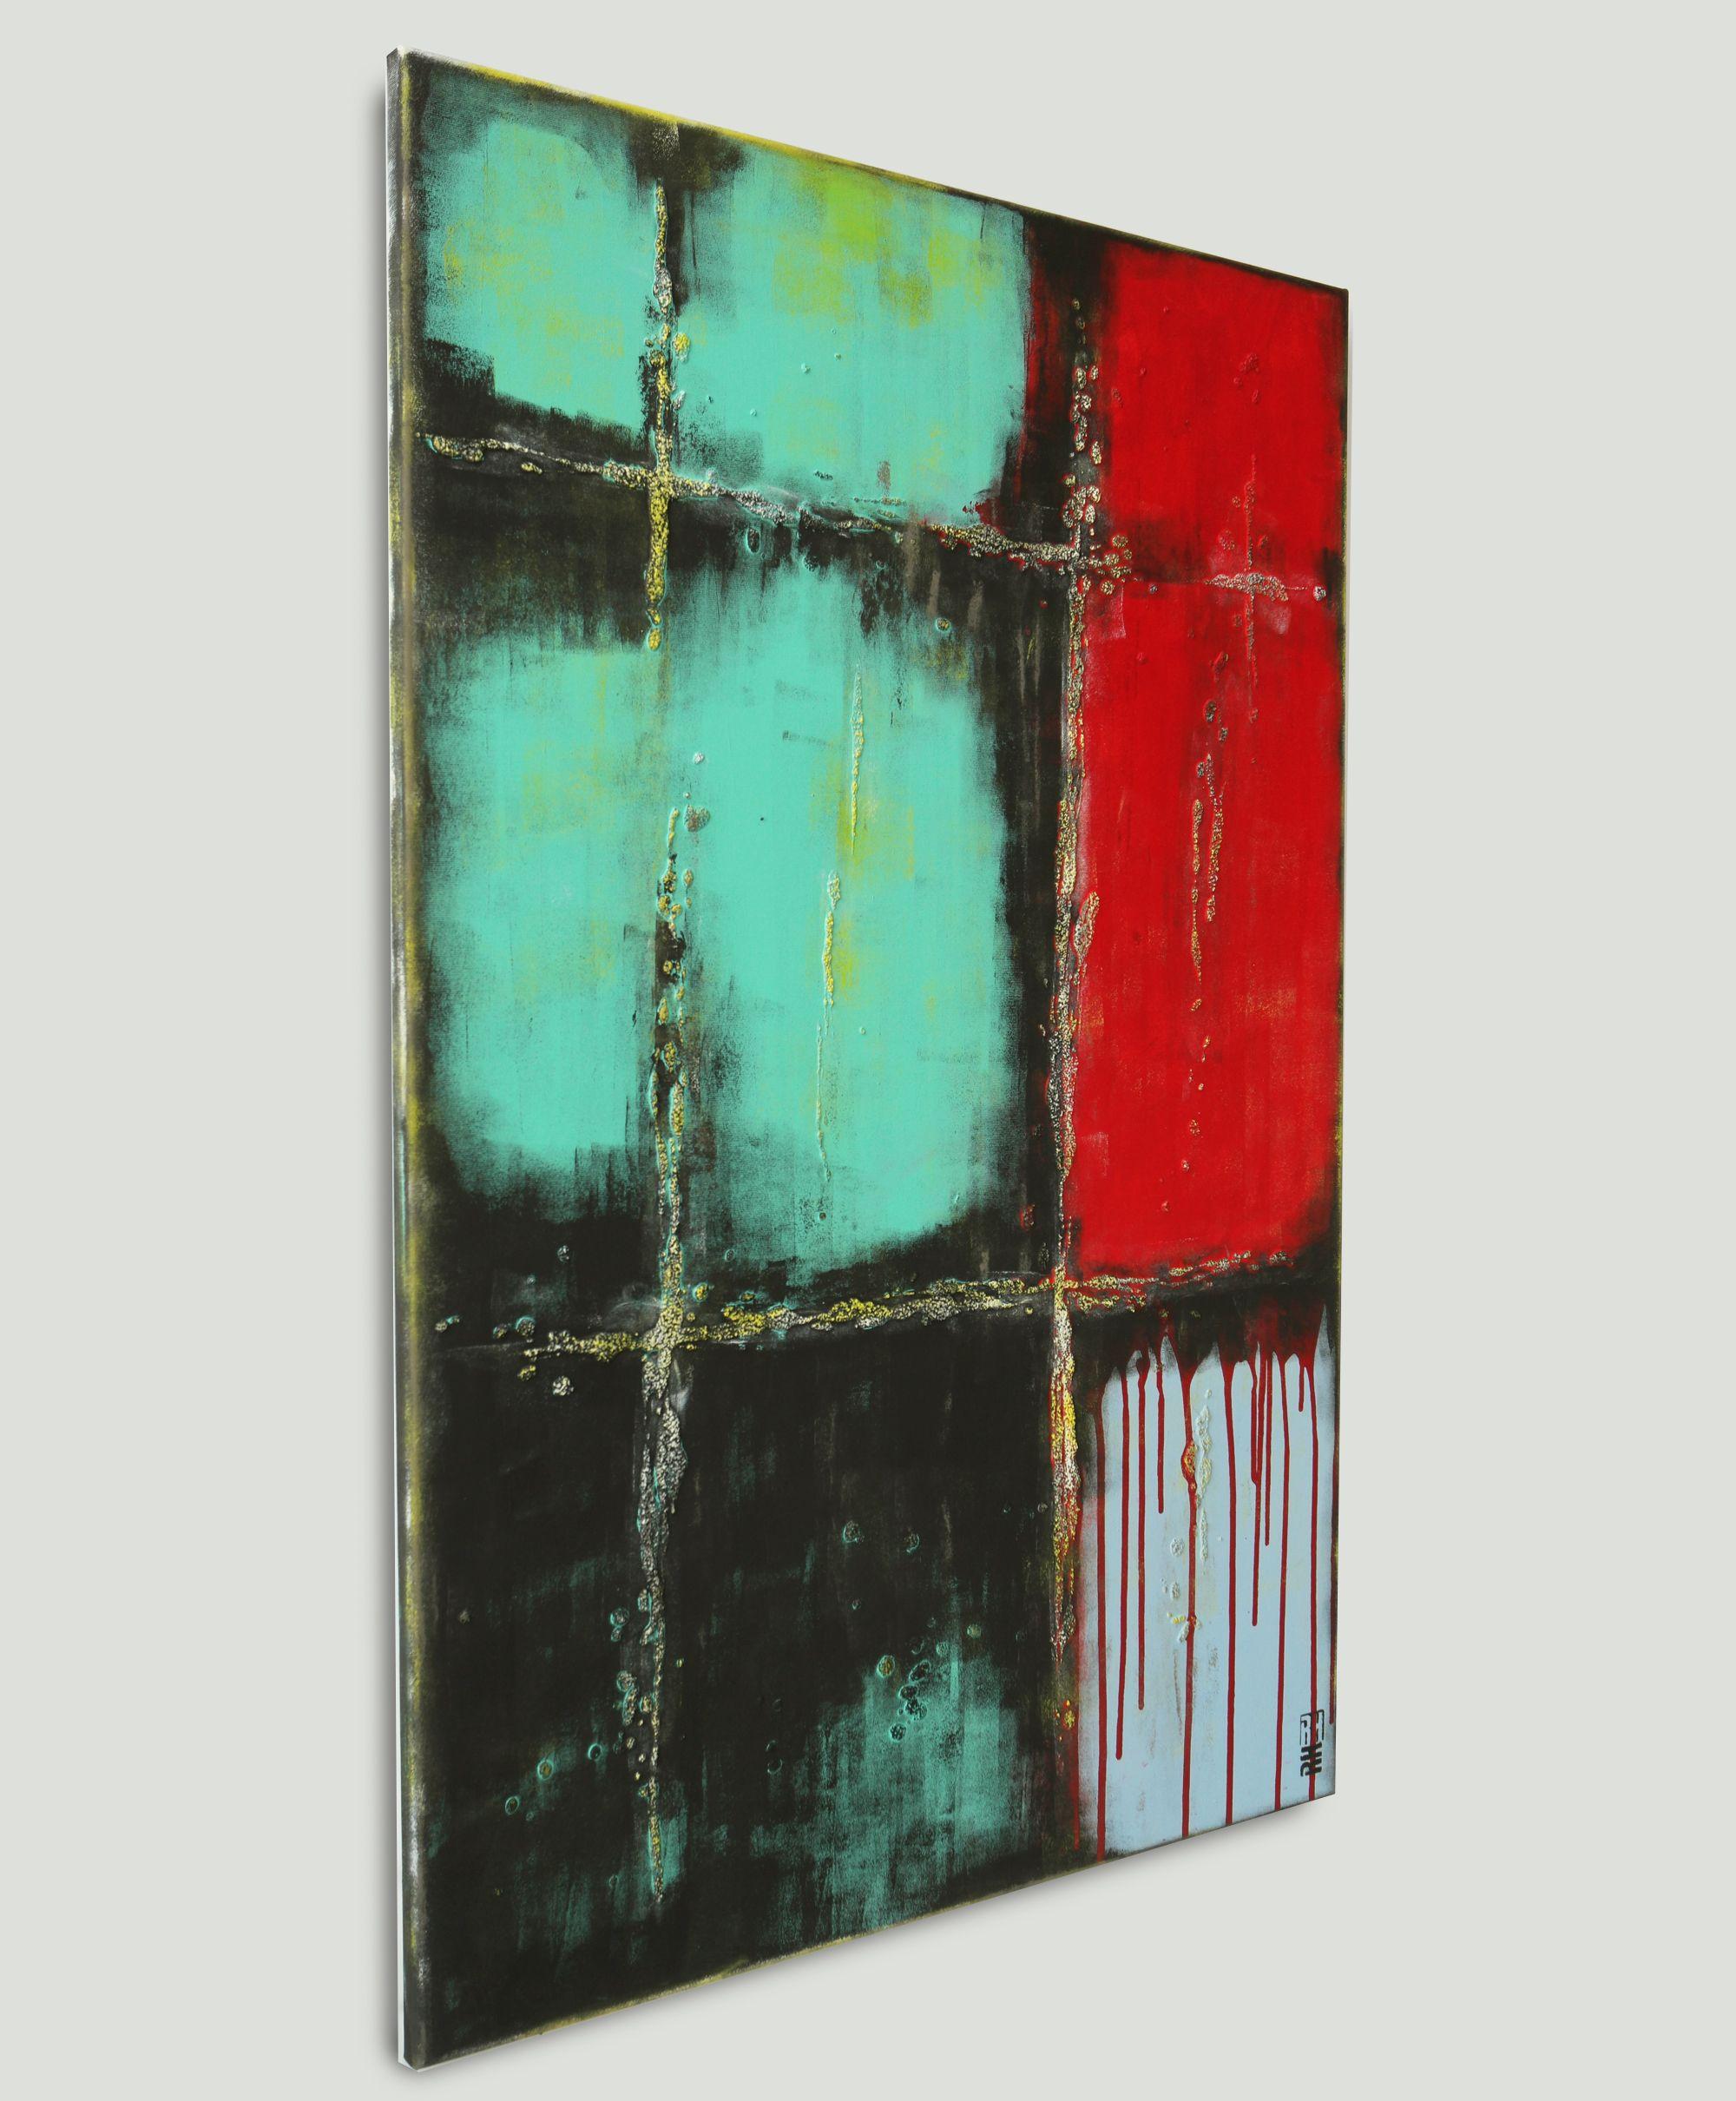 Contrasting colors red and blue predominate in the abstract painting 'RED over Turquoise'. These striking colors can make a beautiful statement in your home. This piece can be hung differently (horizontal or vertical) to accommodate your personal